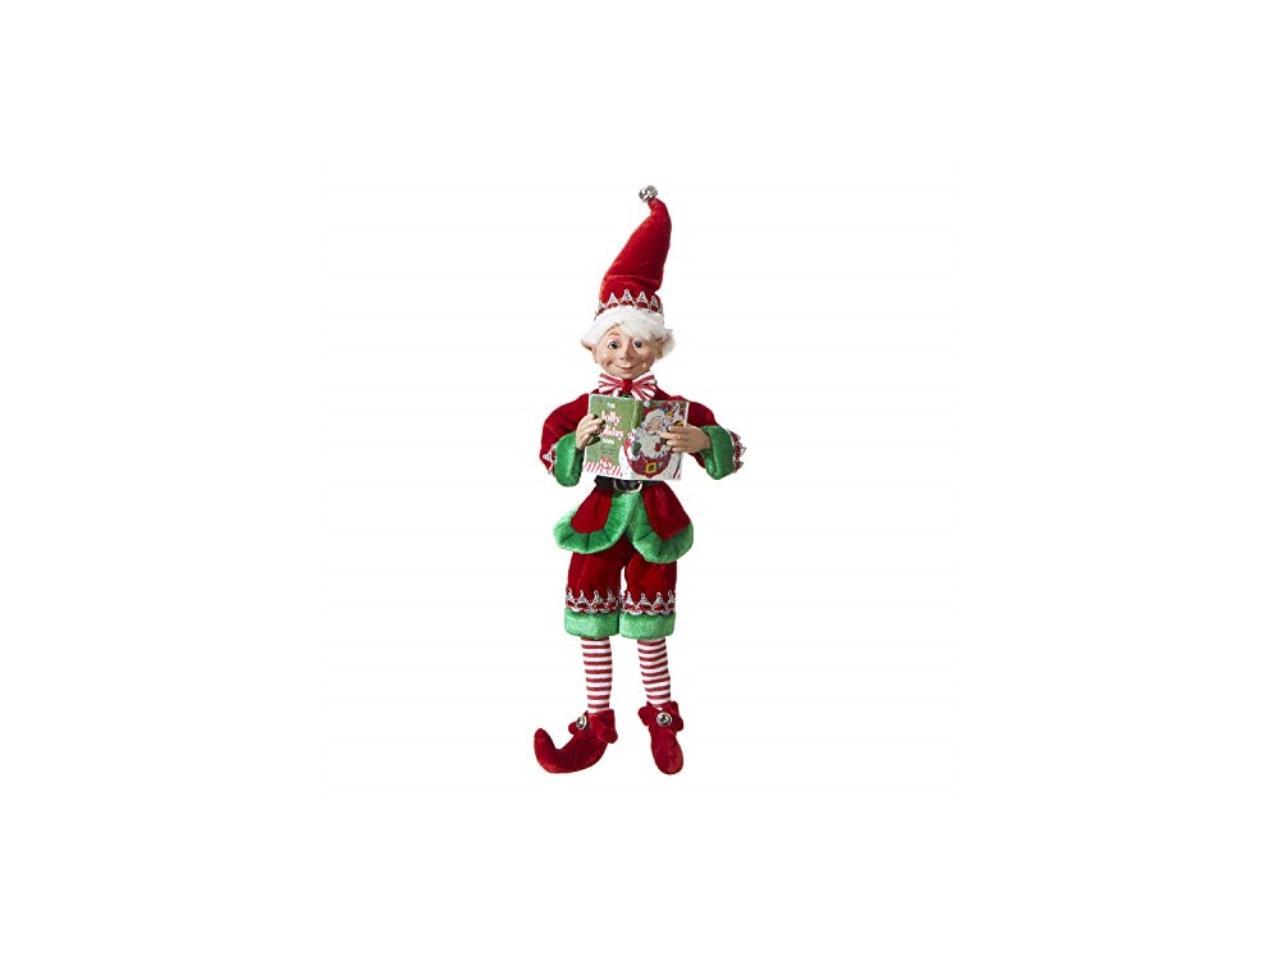 30 Tall RAZ Imports Posable Christmas Elf 2019 Reindeer Games Holiday Collection Red and Green Velvet Outfit with Santa Book